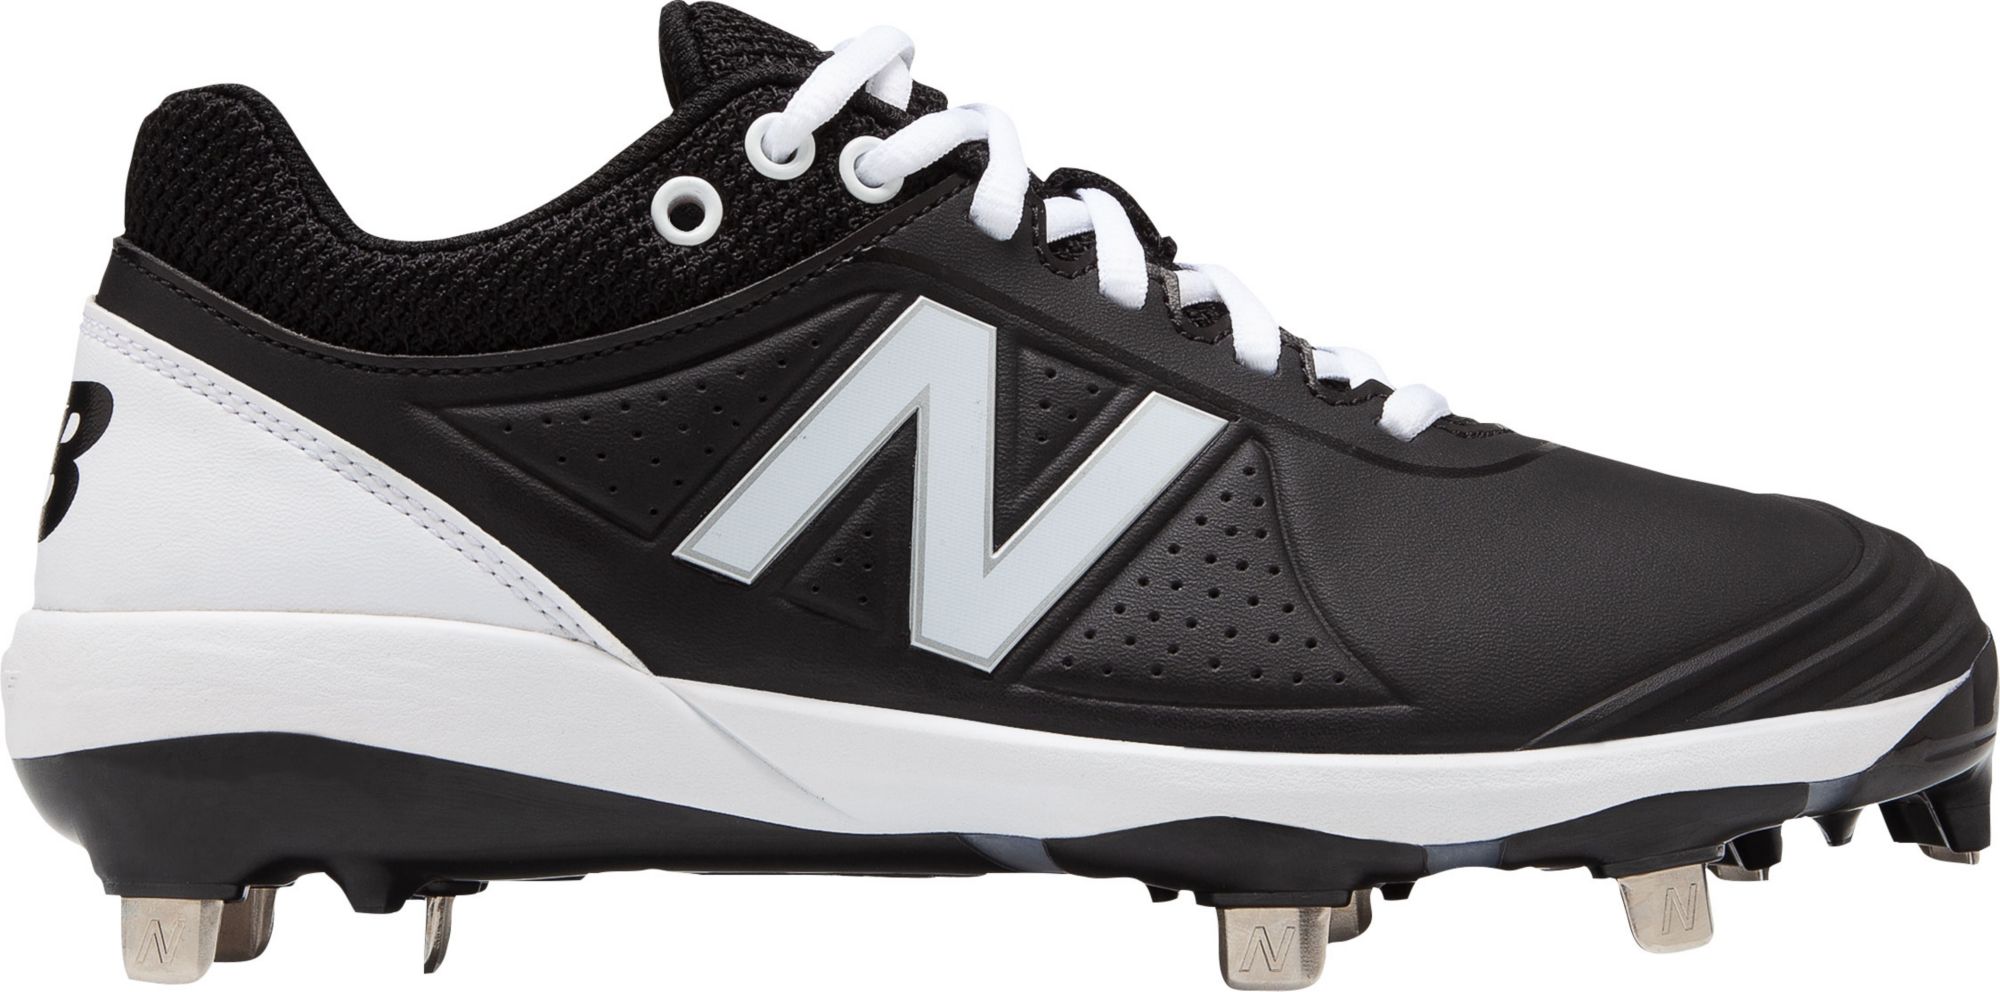 black and white new balance metal cleats